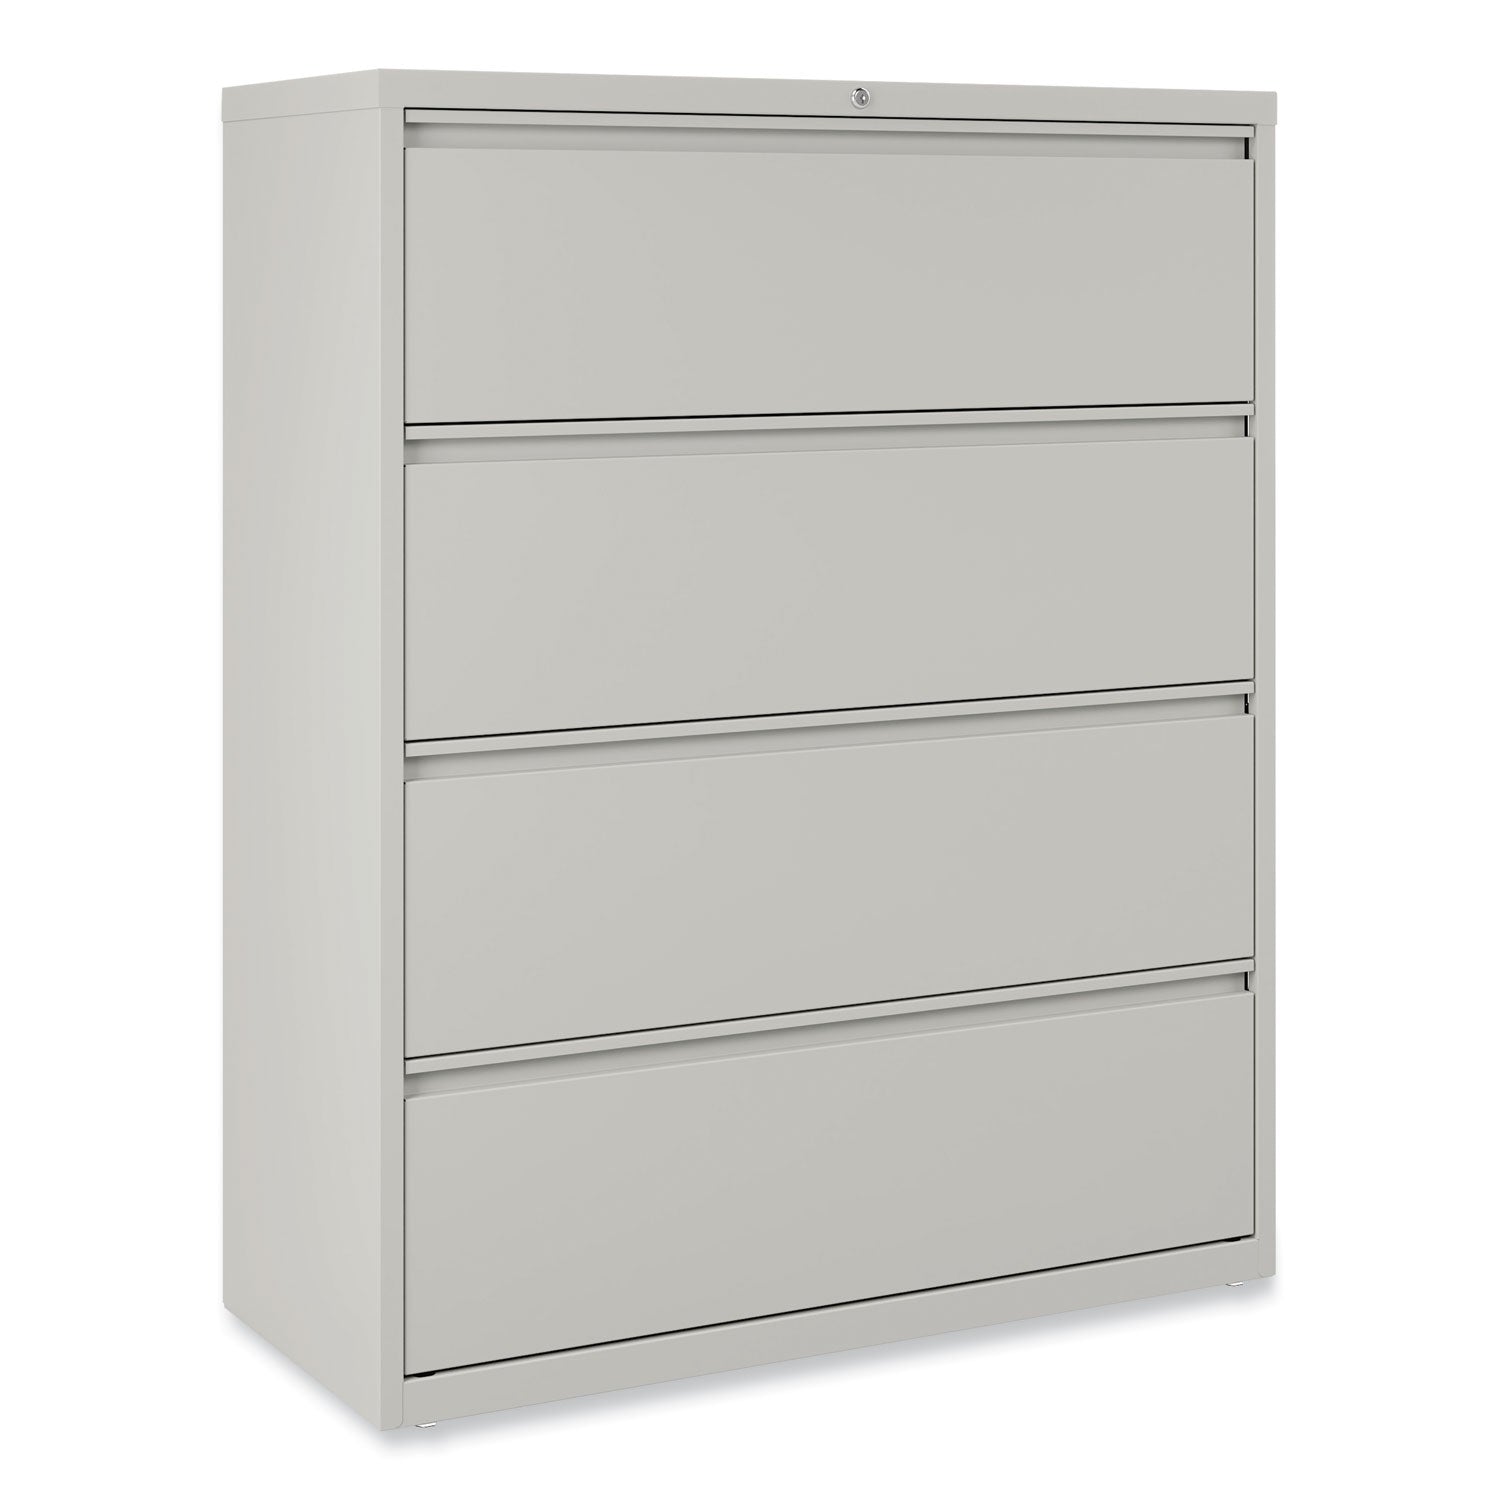 lateral-file-4-legal-letter-size-file-drawers-light-gray-42-x-1863-x-525_alehlf4254lg - 1